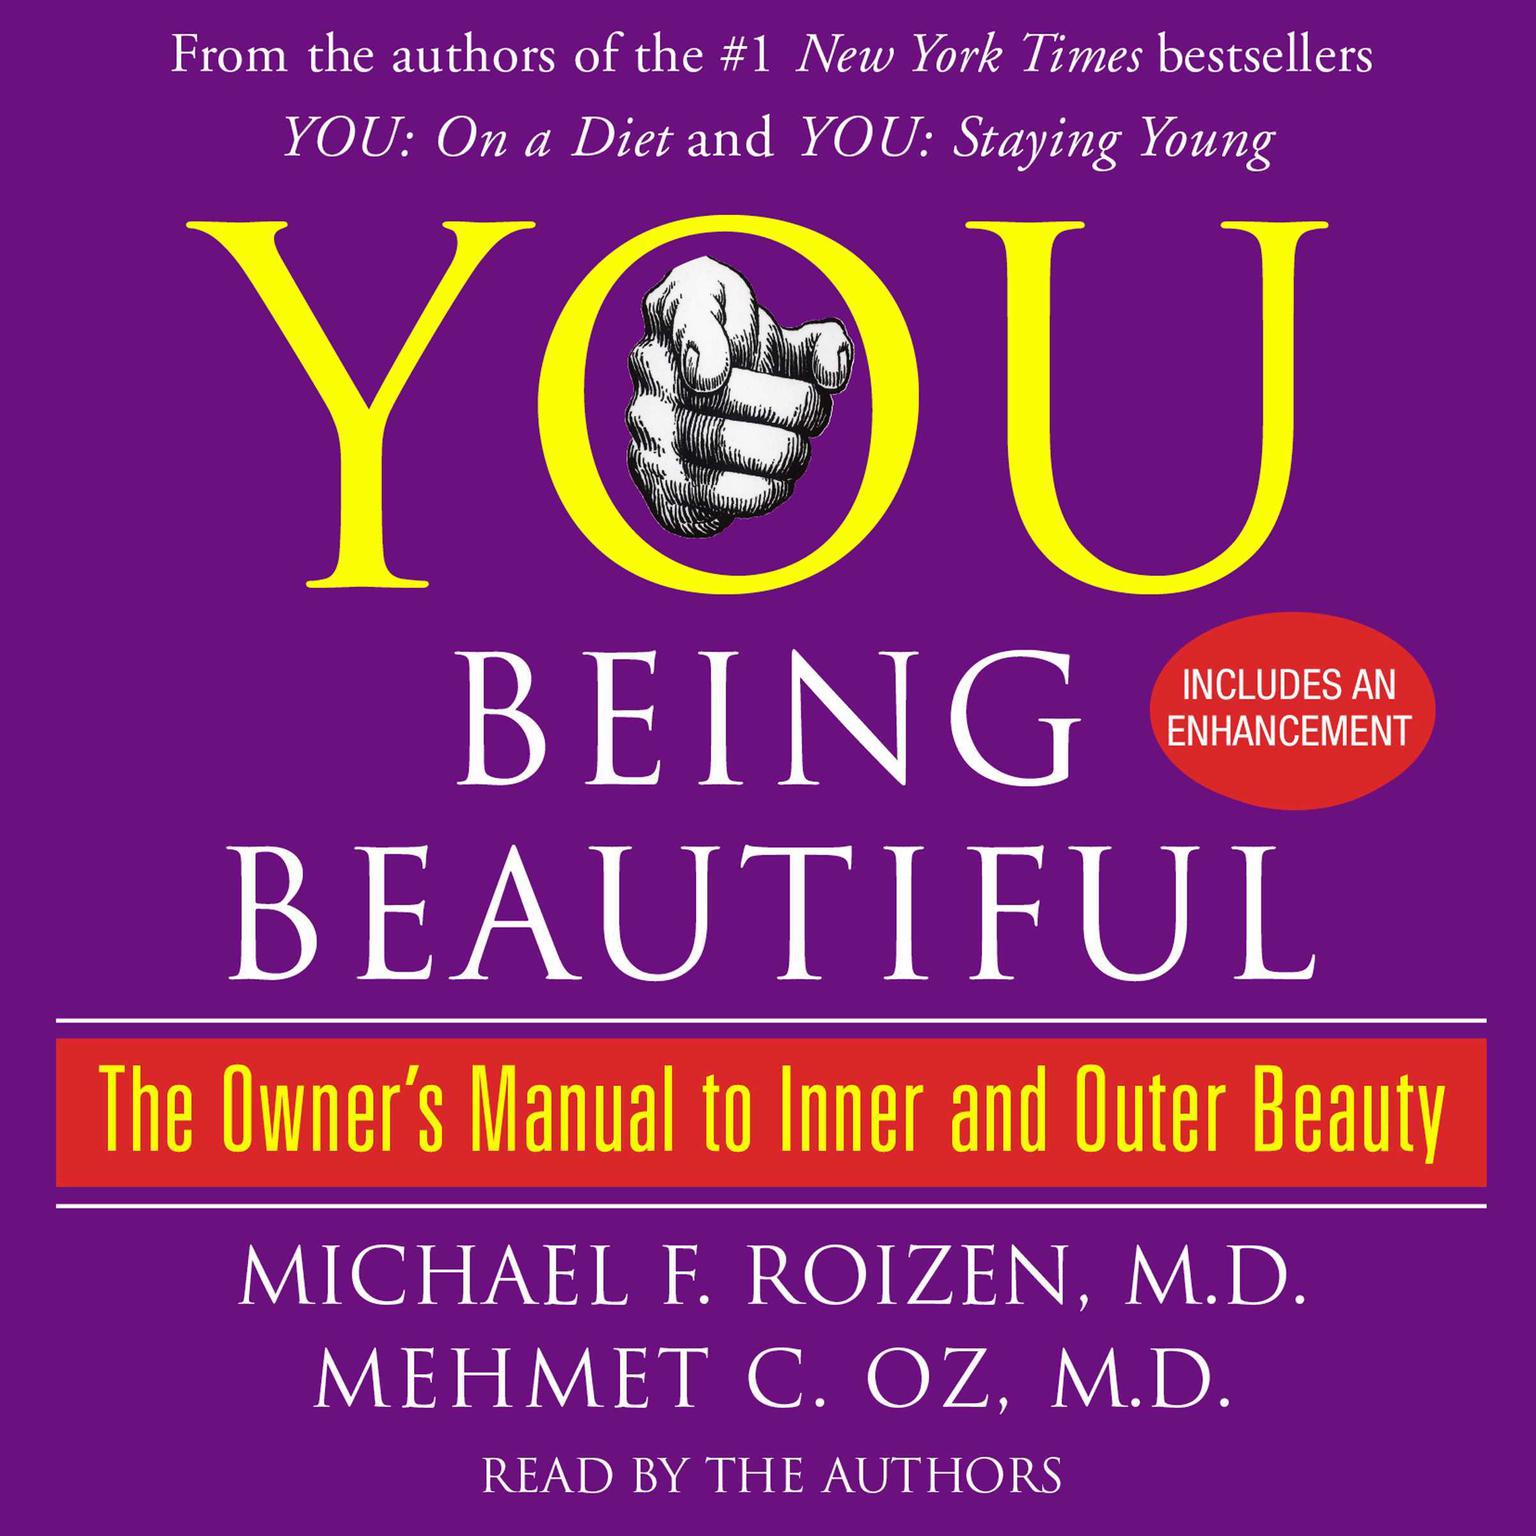 YOU: Being Beautiful (Abridged): The Owners Manual to Inner and Outer Beauty Audiobook, by Mehmet C. Oz